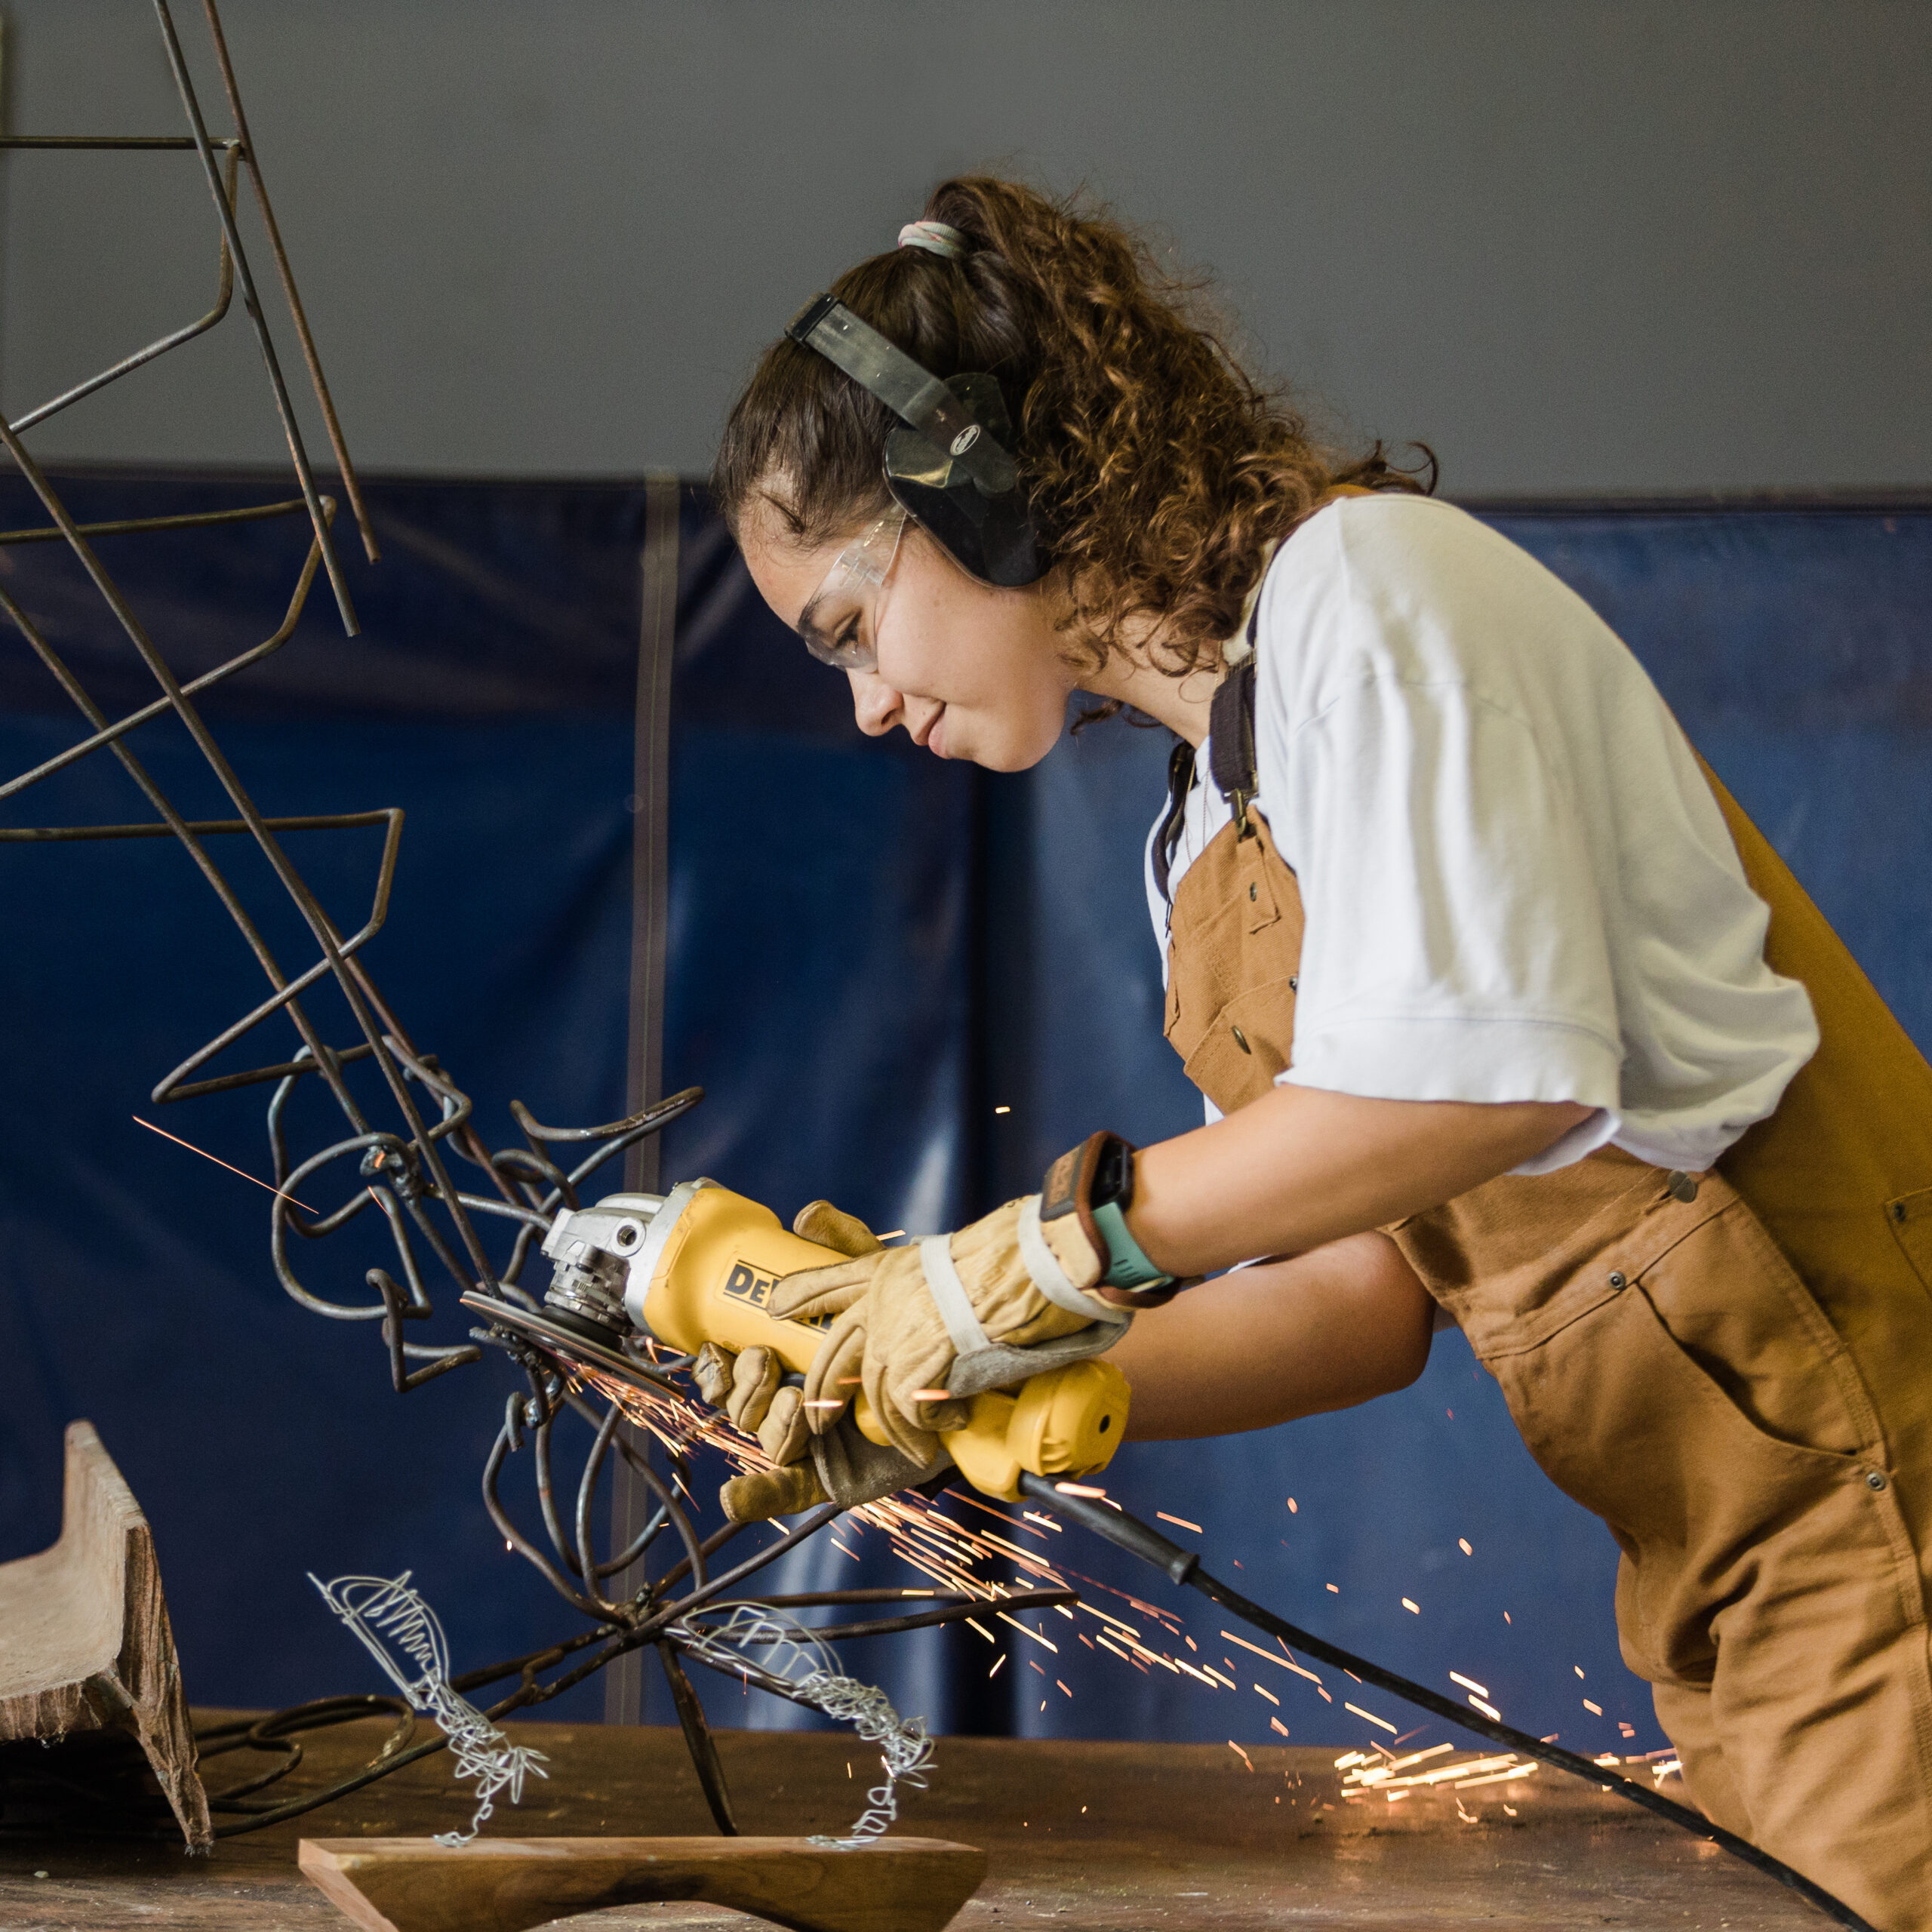 DFW brand photographer; photo of a woman wearing brown denim overalls, work gloves, and safety goggles using a power grinder on a metal sculpture in front of a dark blue background